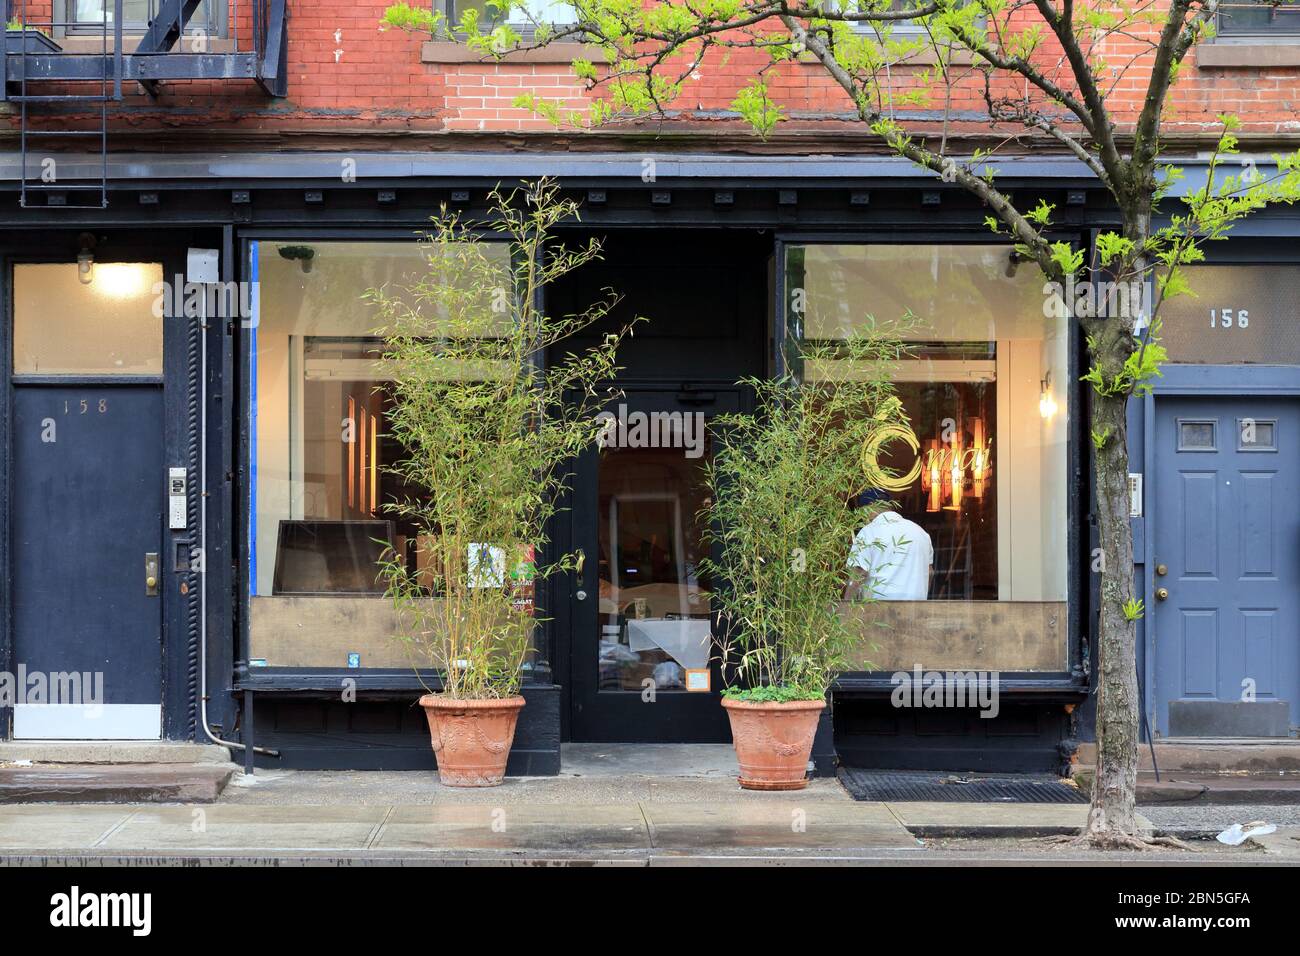 [historical storefront] Omai, 158 9th Ave, New York, NYC storefront photo of a Vietnamese restaurant in the Chelsea neighborhood of Manhattan. Stock Photo